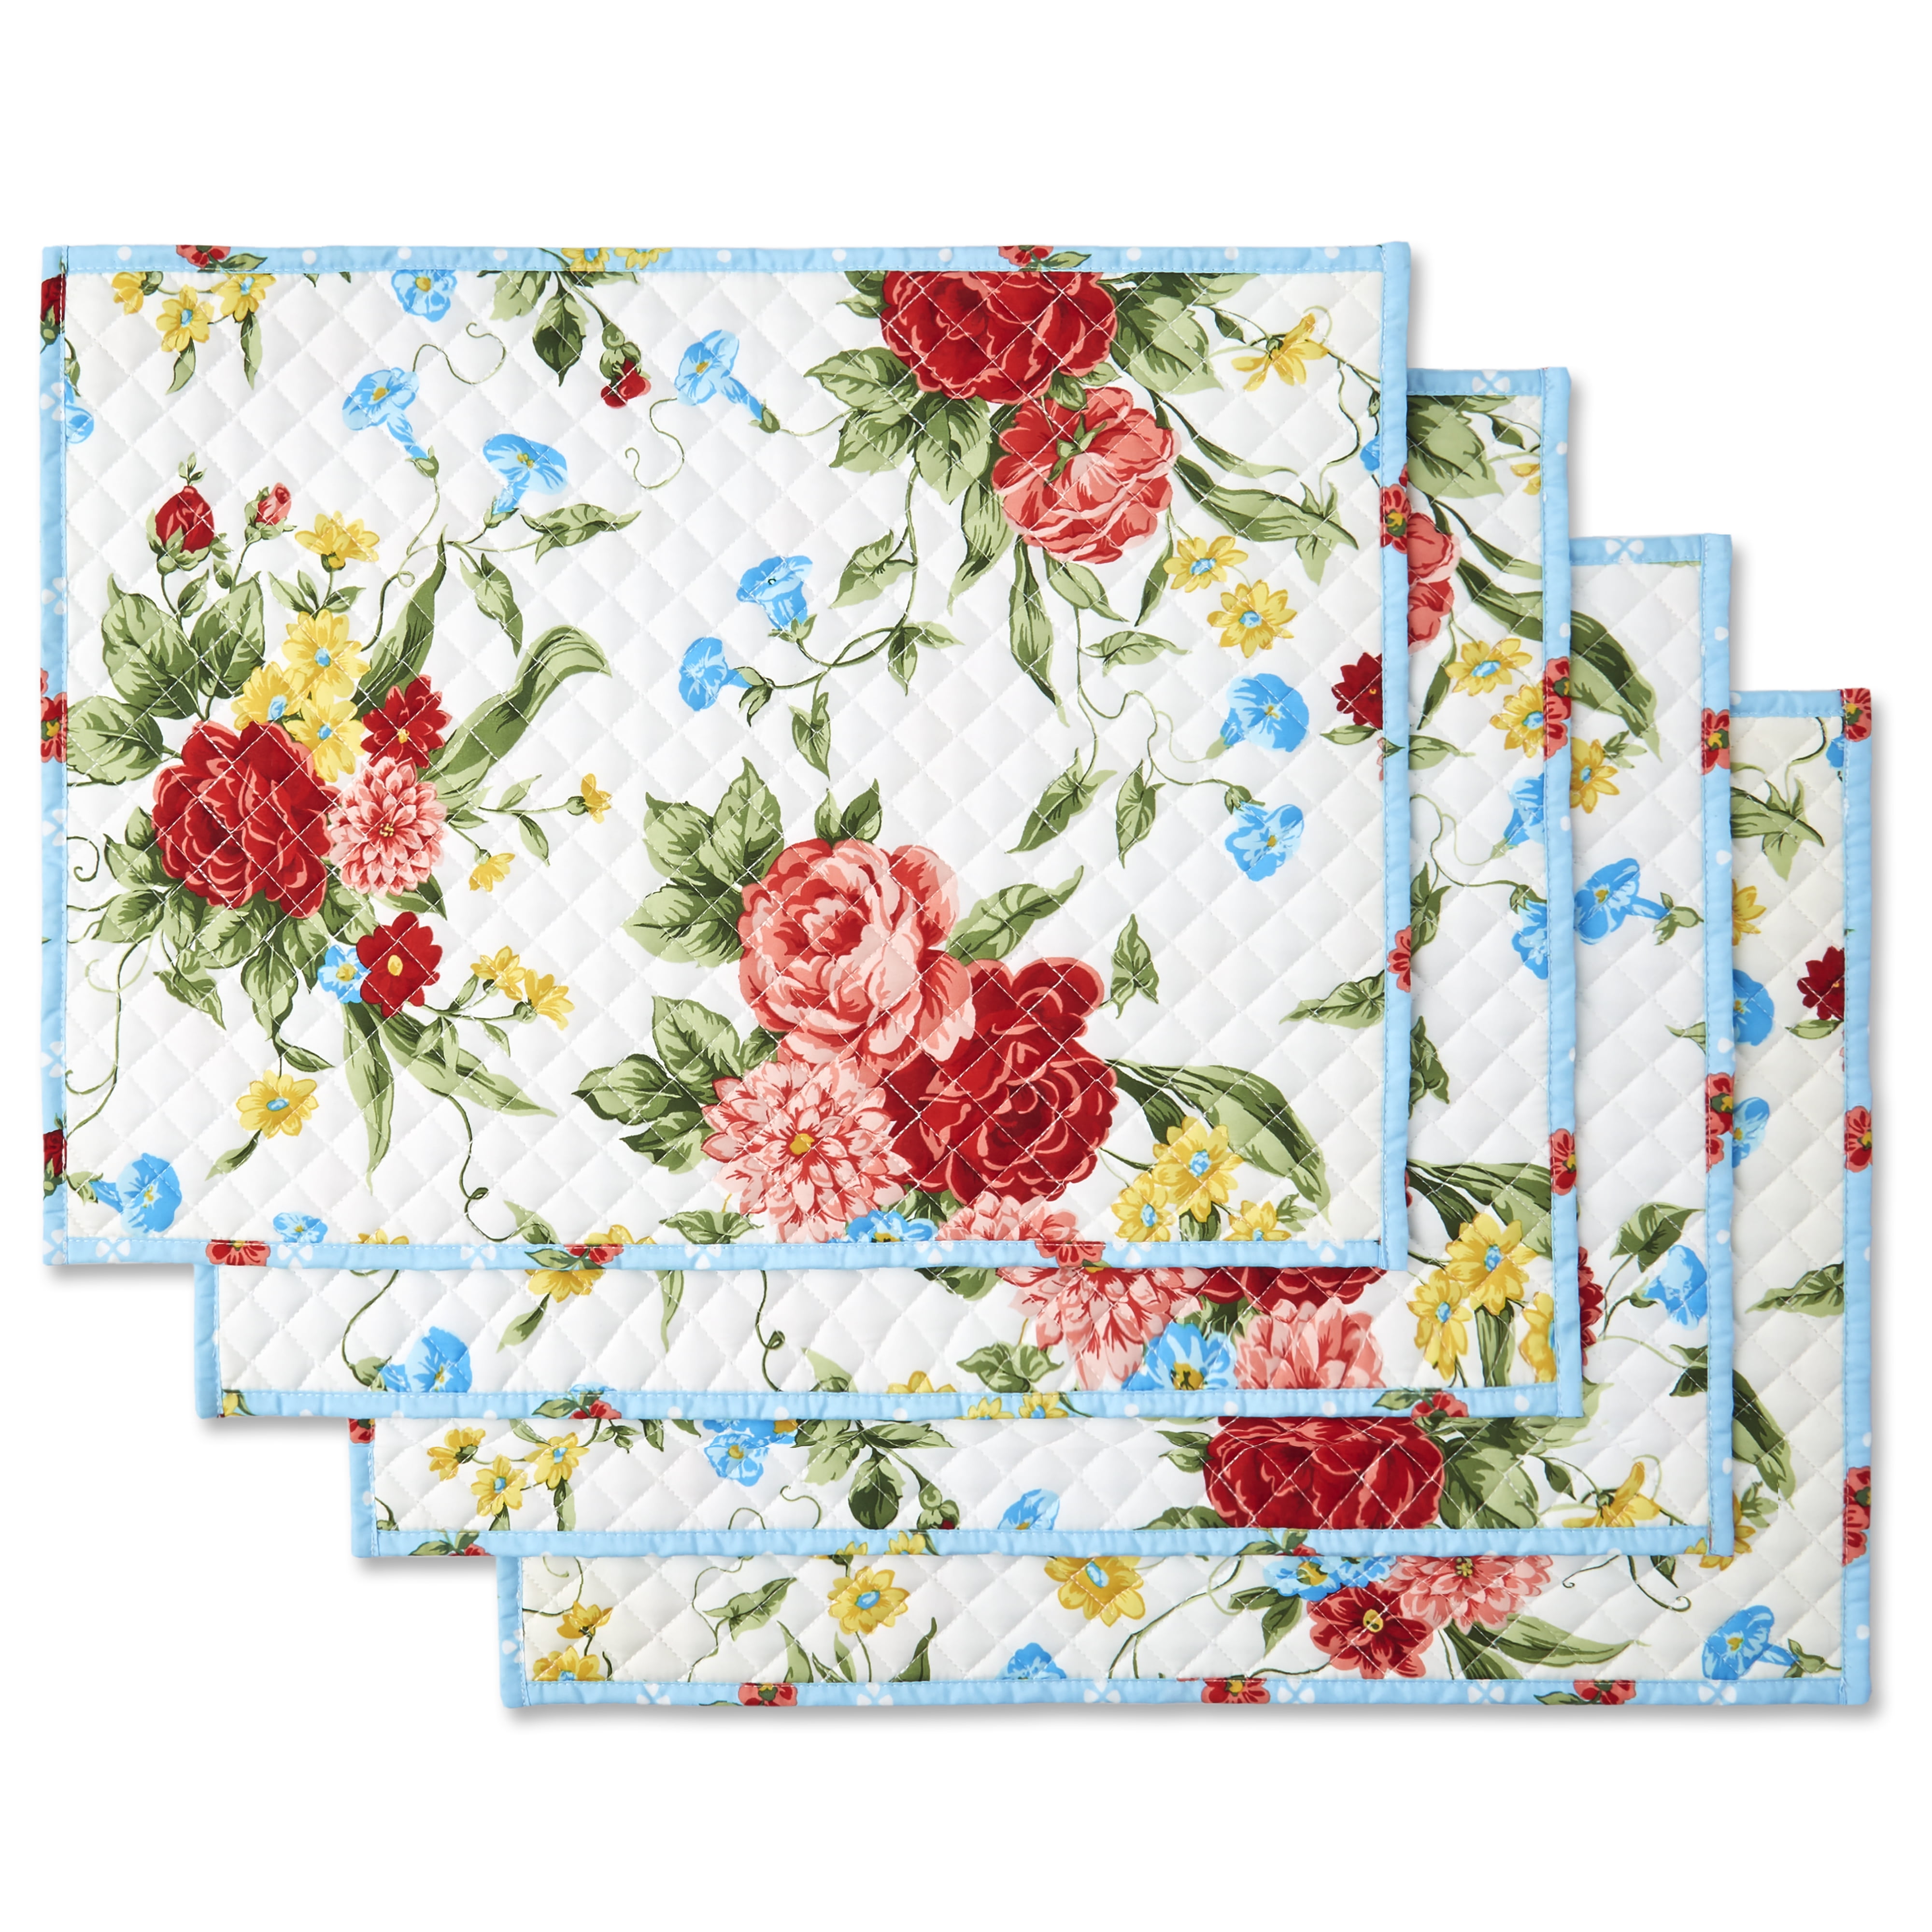 ALAZA U Life Vintage Floral Flowers Birds Placemats Place Mats Plate Tray Mat 12 x 18 Inch